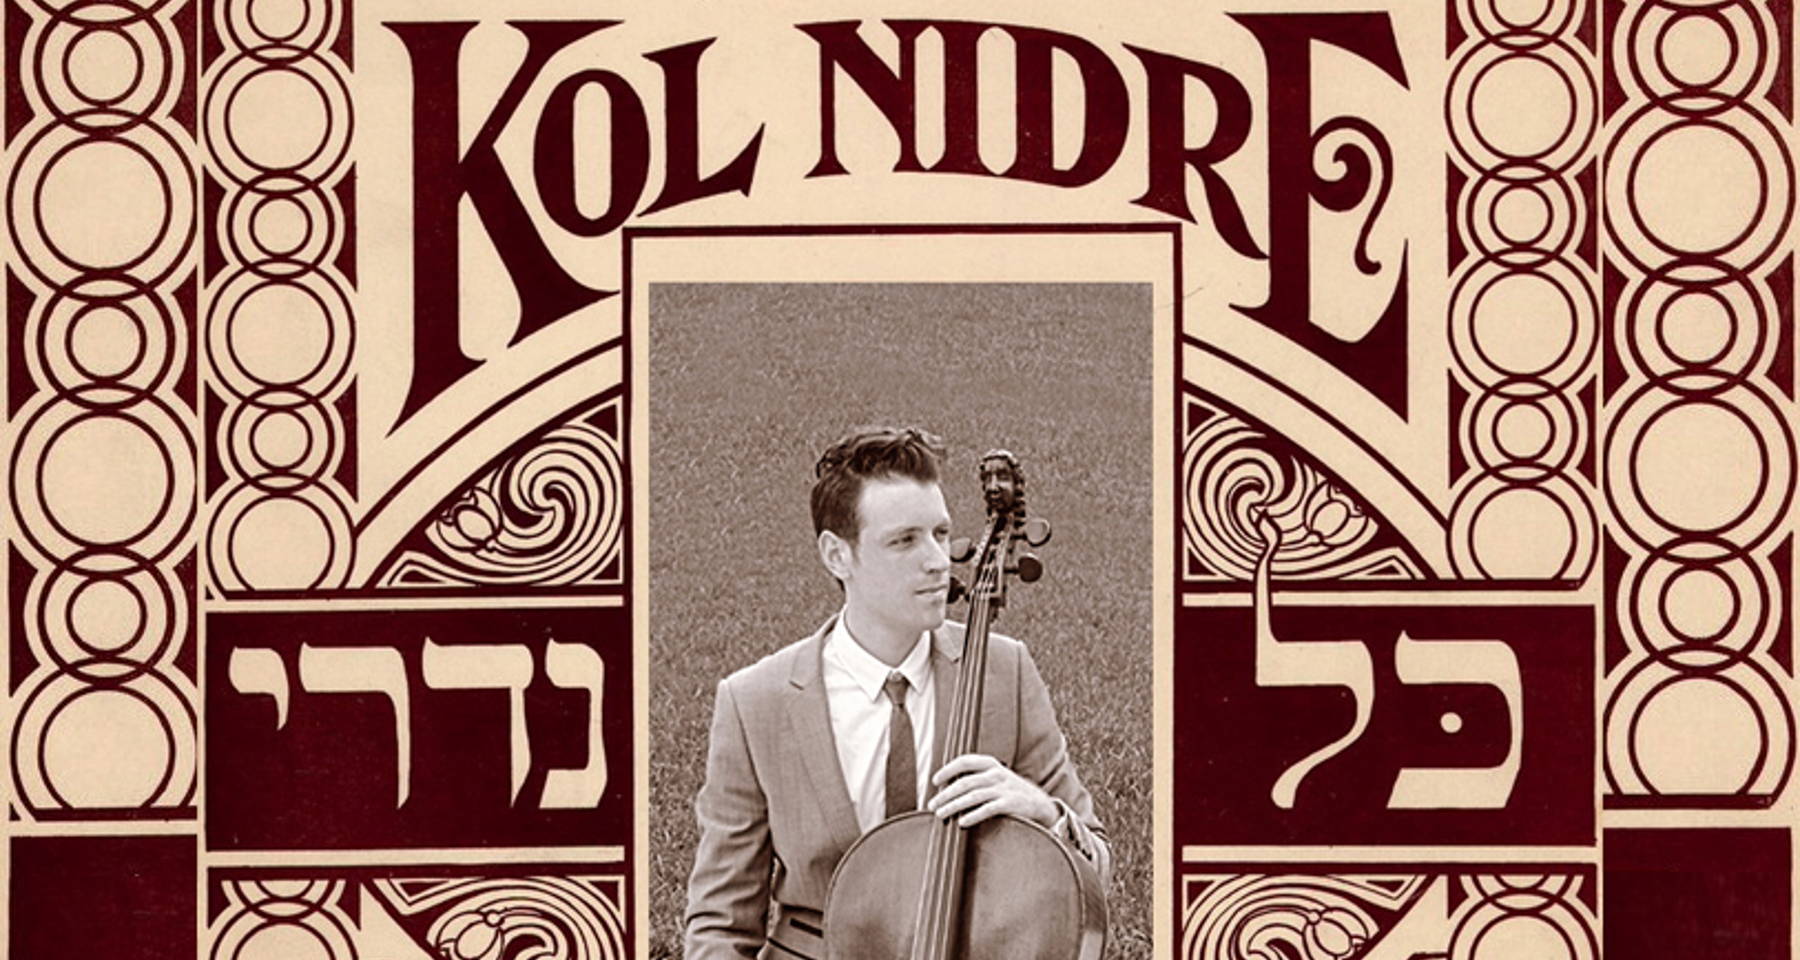 Kol Nidre to Beatles: An Orchestral Experience @ JCC at W 76th st